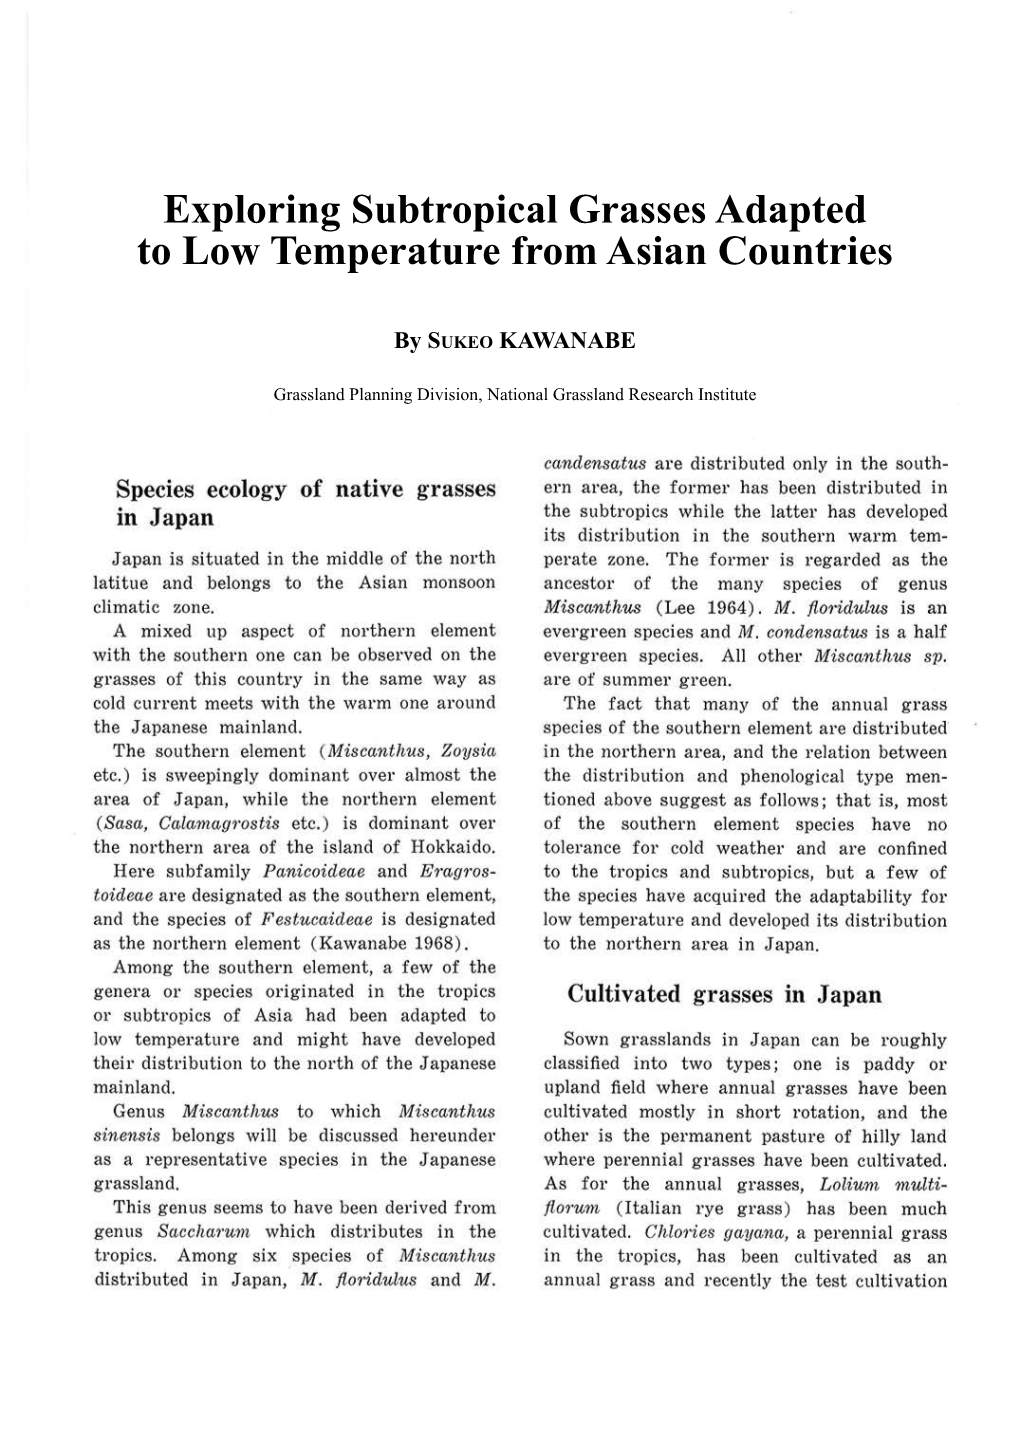 Exploring Subtropical Grasses Adapted to Low Temperature from Asian Countries